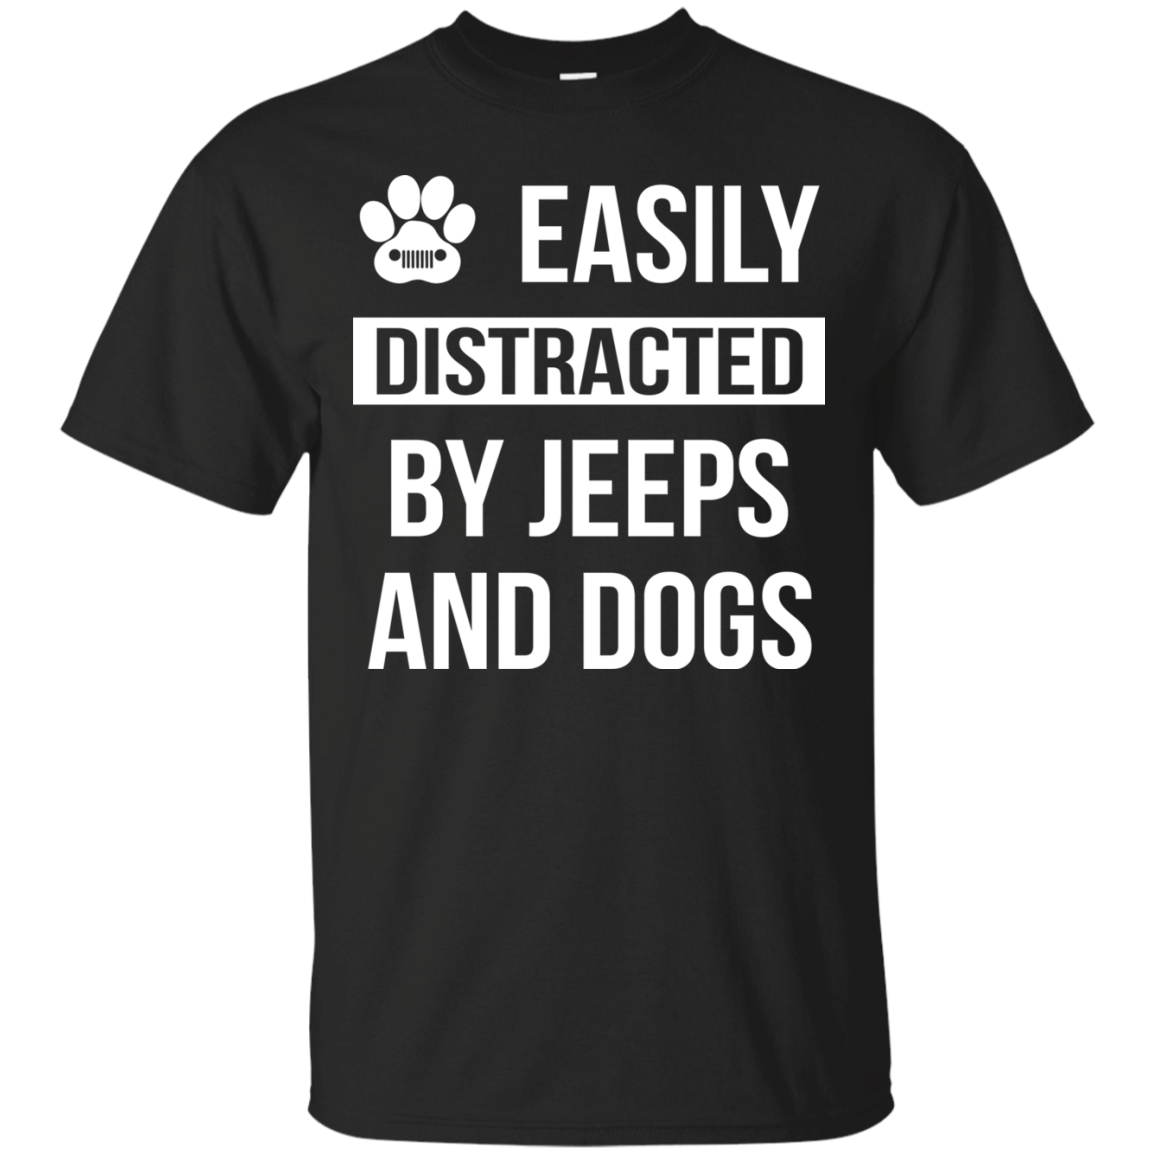 Easily Distracted By Jeeps and Dogs shirt